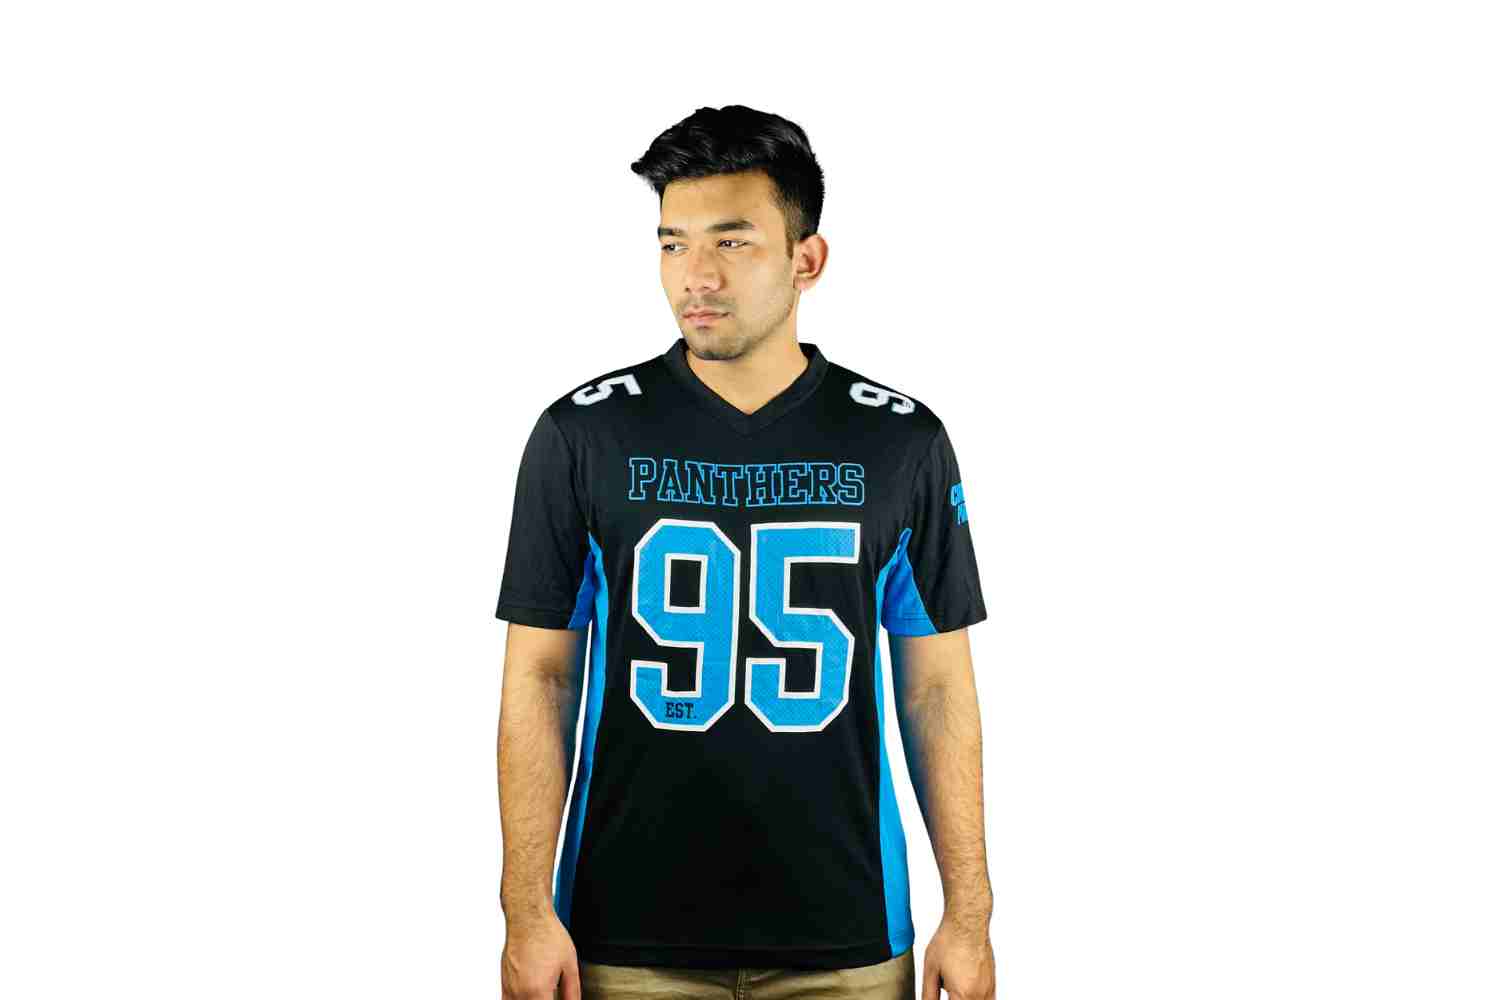 Ultimate Comfort & Team Pride: The Athlete's Choice – NFL Jersey for Fitness and Athleisure Enthusiasts